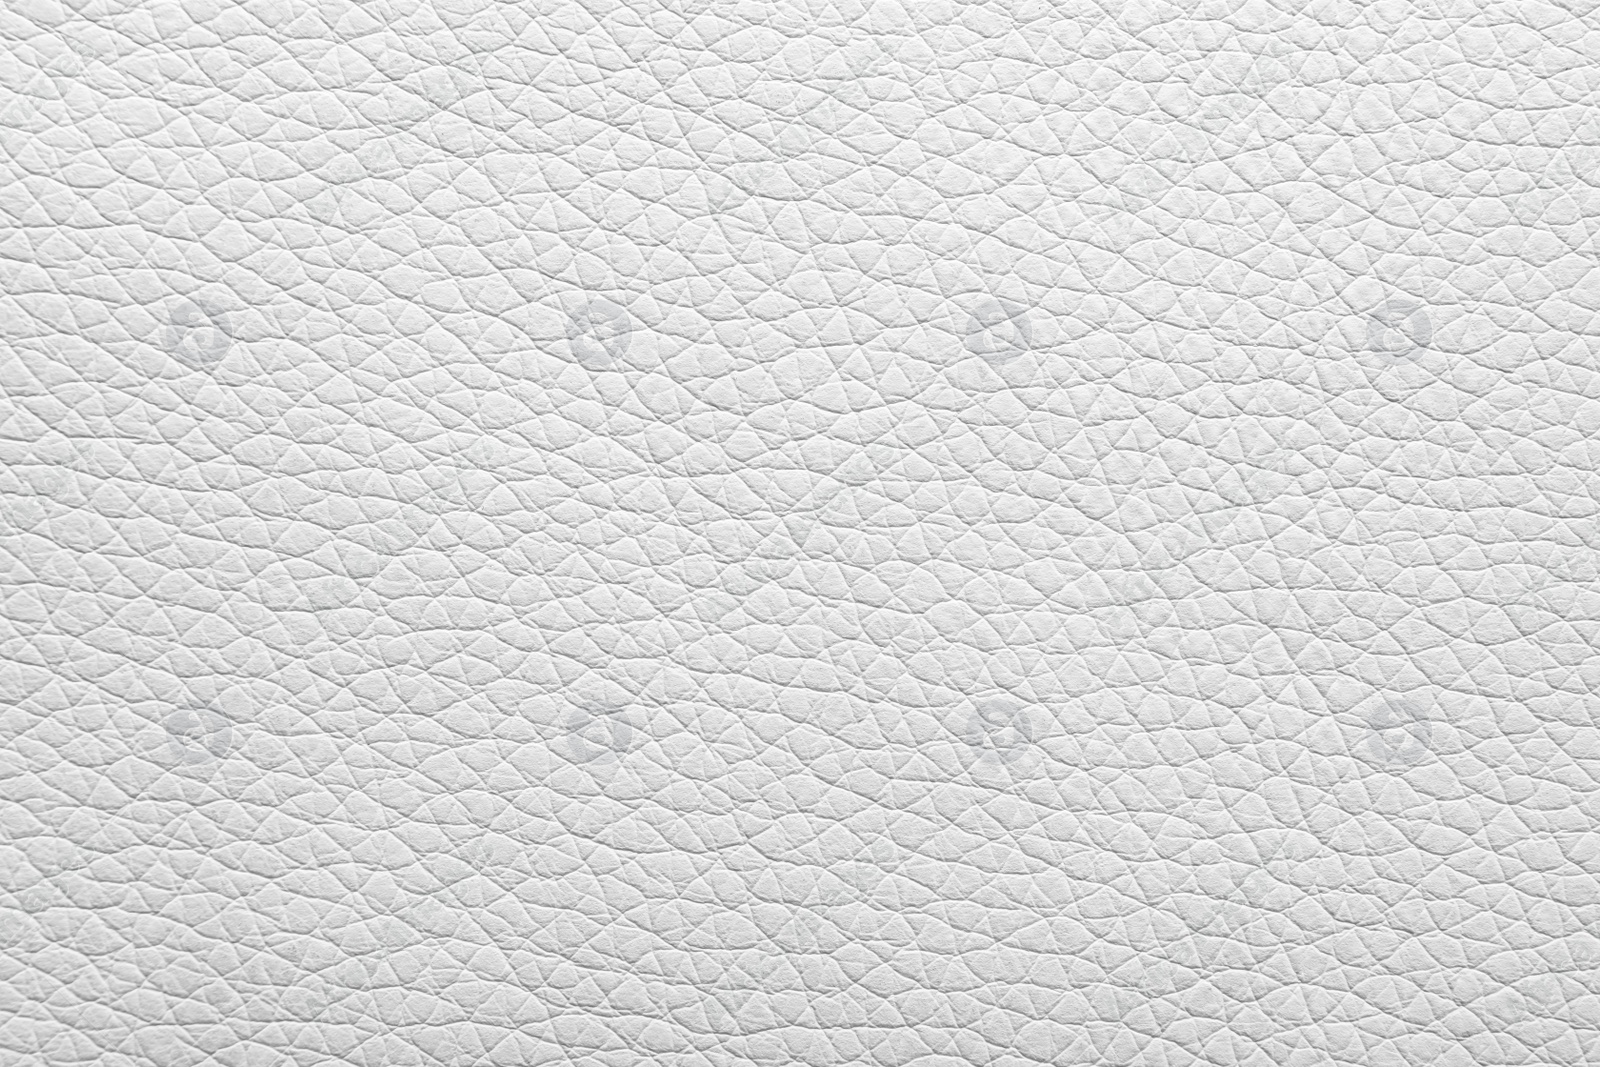 Photo of Texture of light leather as background, closeup